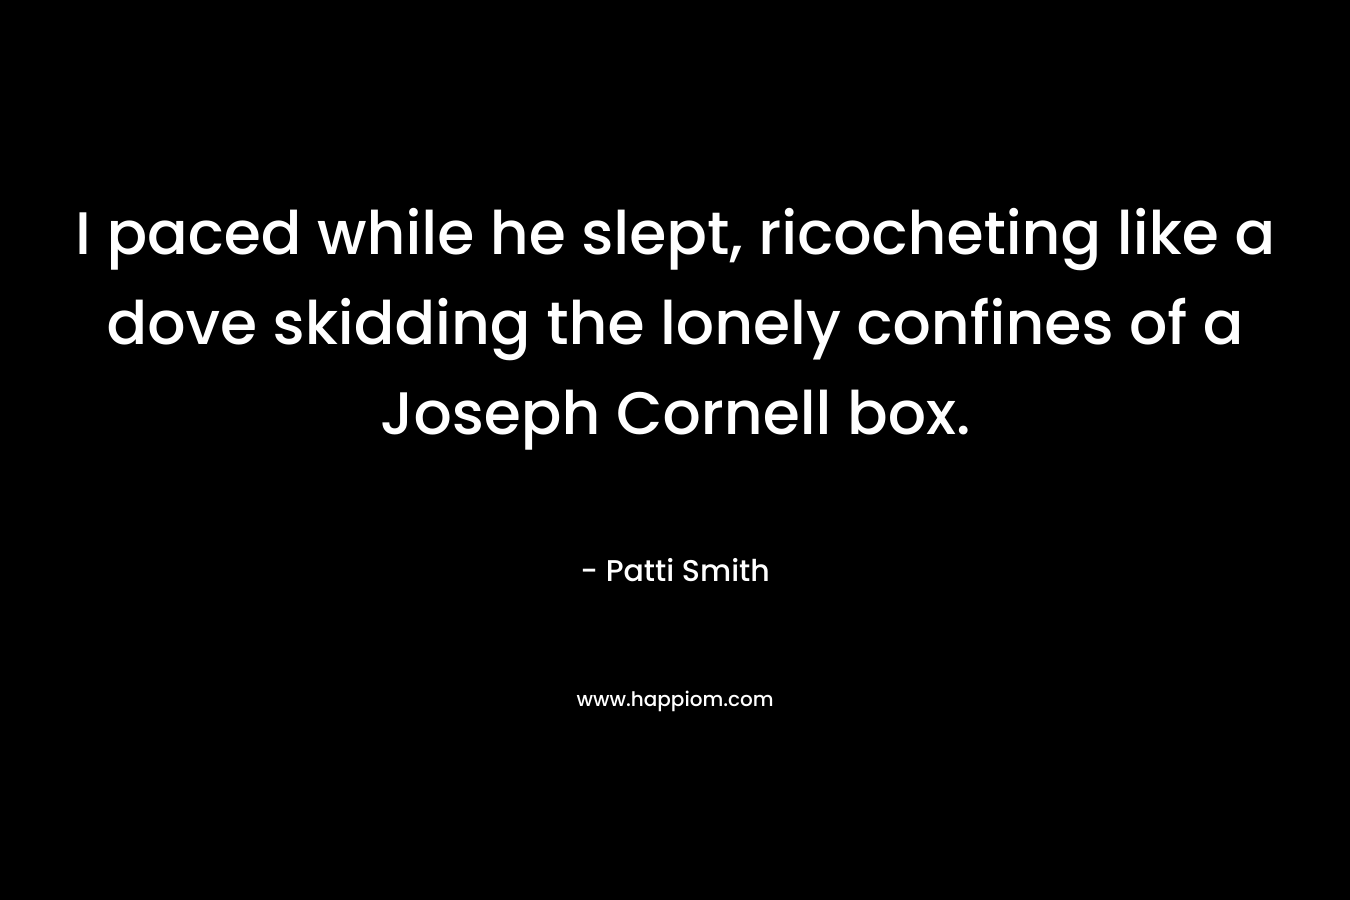 I paced while he slept, ricocheting like a dove skidding the lonely confines of a Joseph Cornell box. – Patti Smith